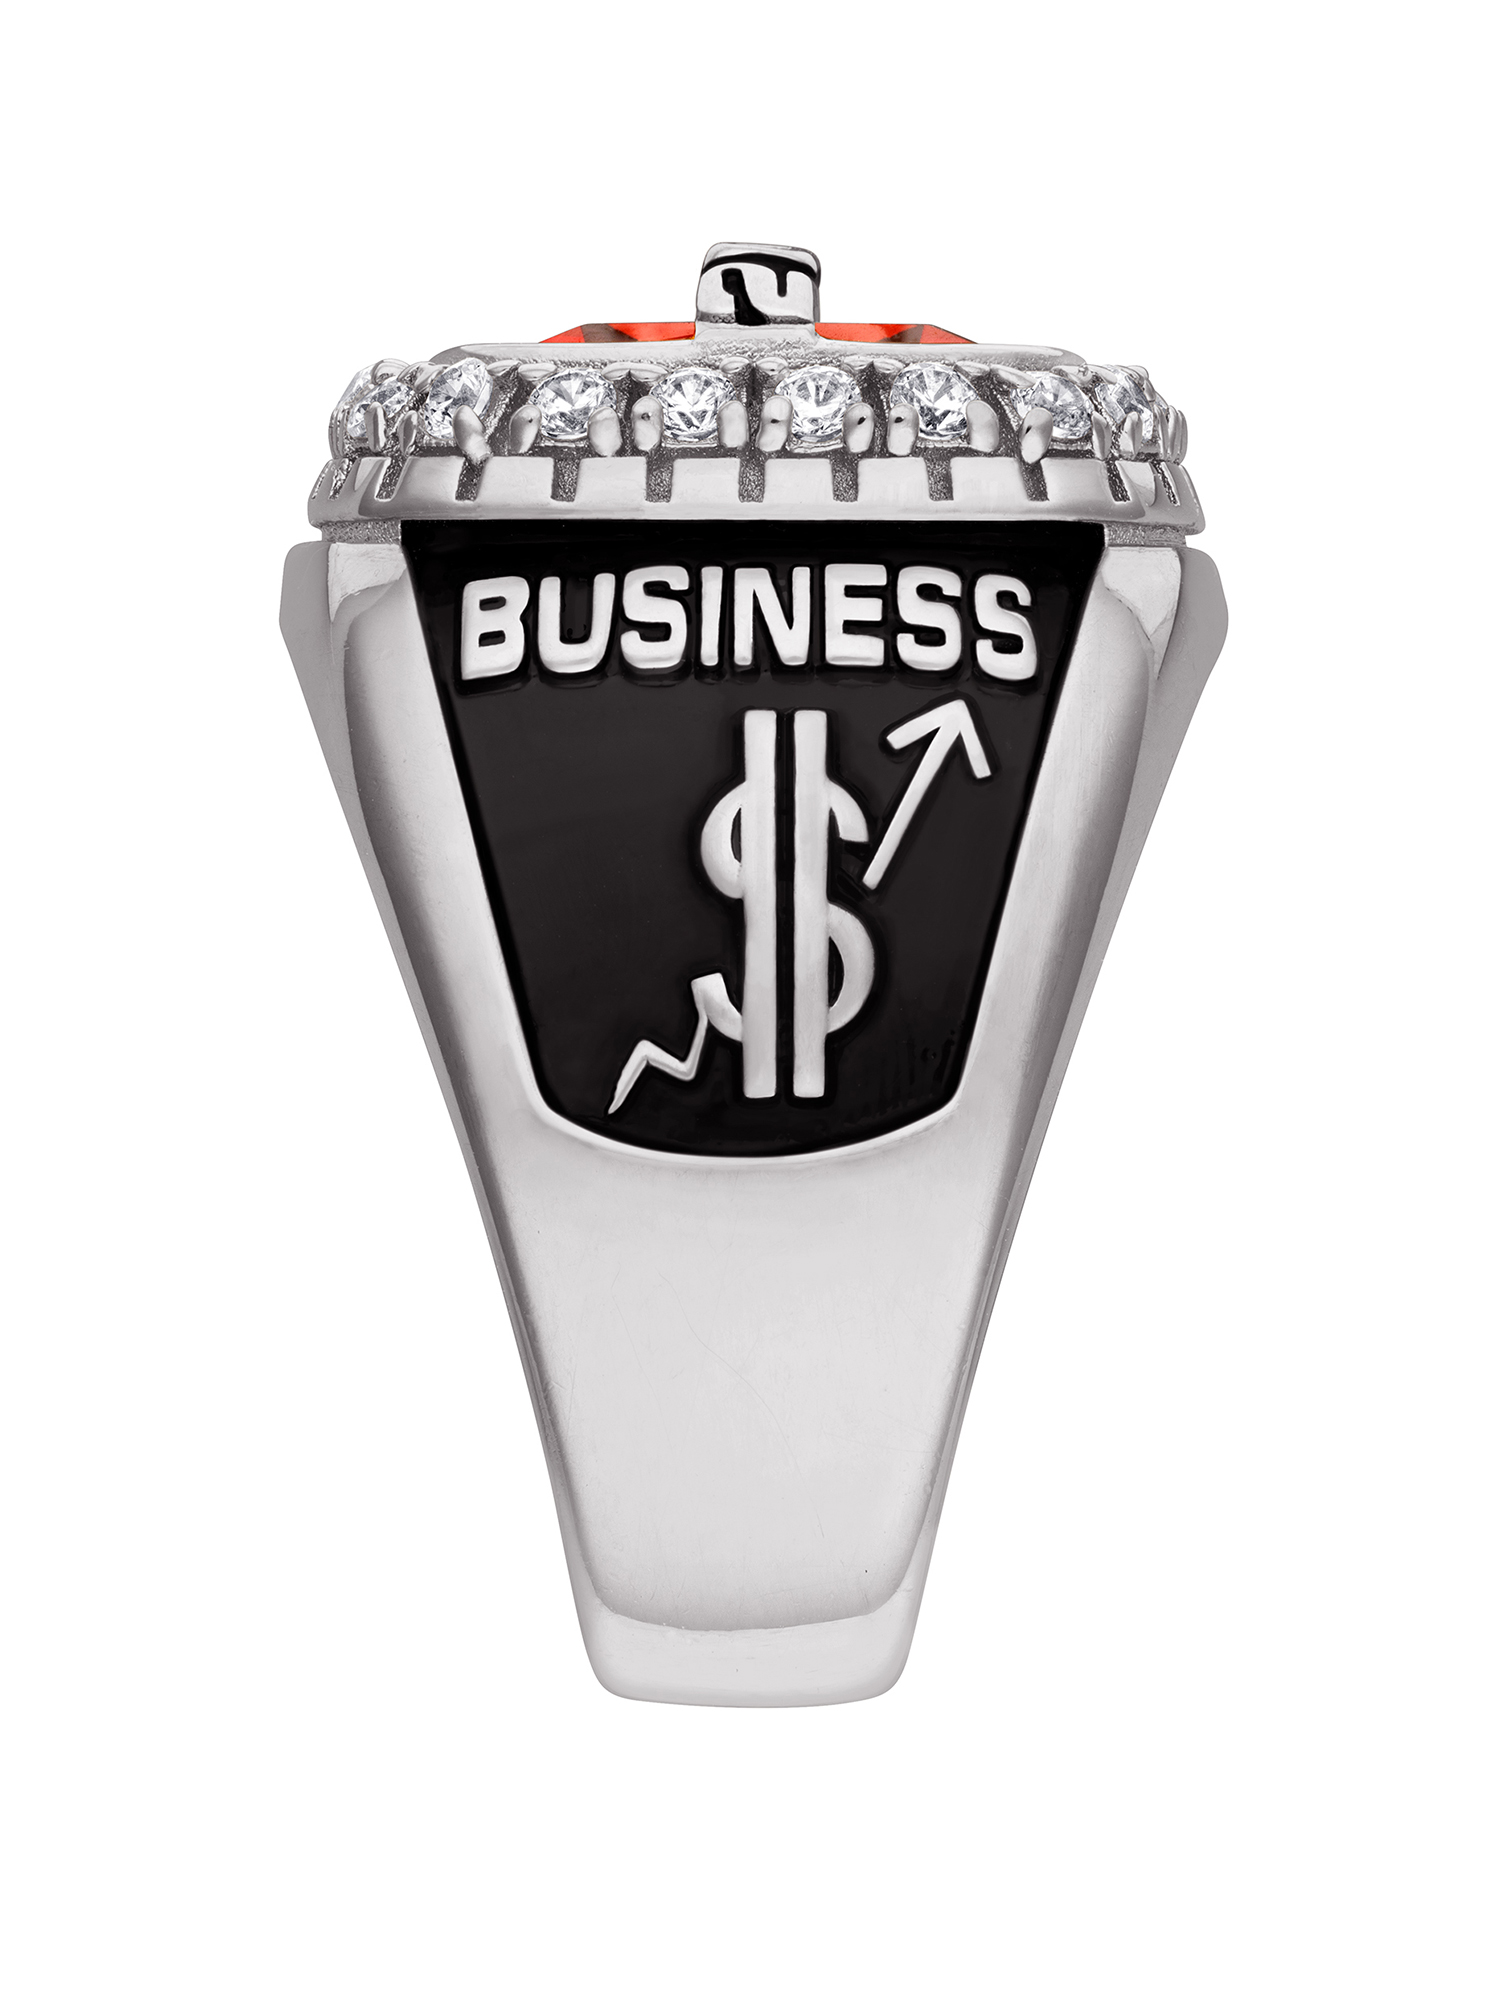 Order Now for Graduation, Freestyle Sterling Silver CZ Encrusted Top Class Ring, Personalized, High School or College - image 3 of 8